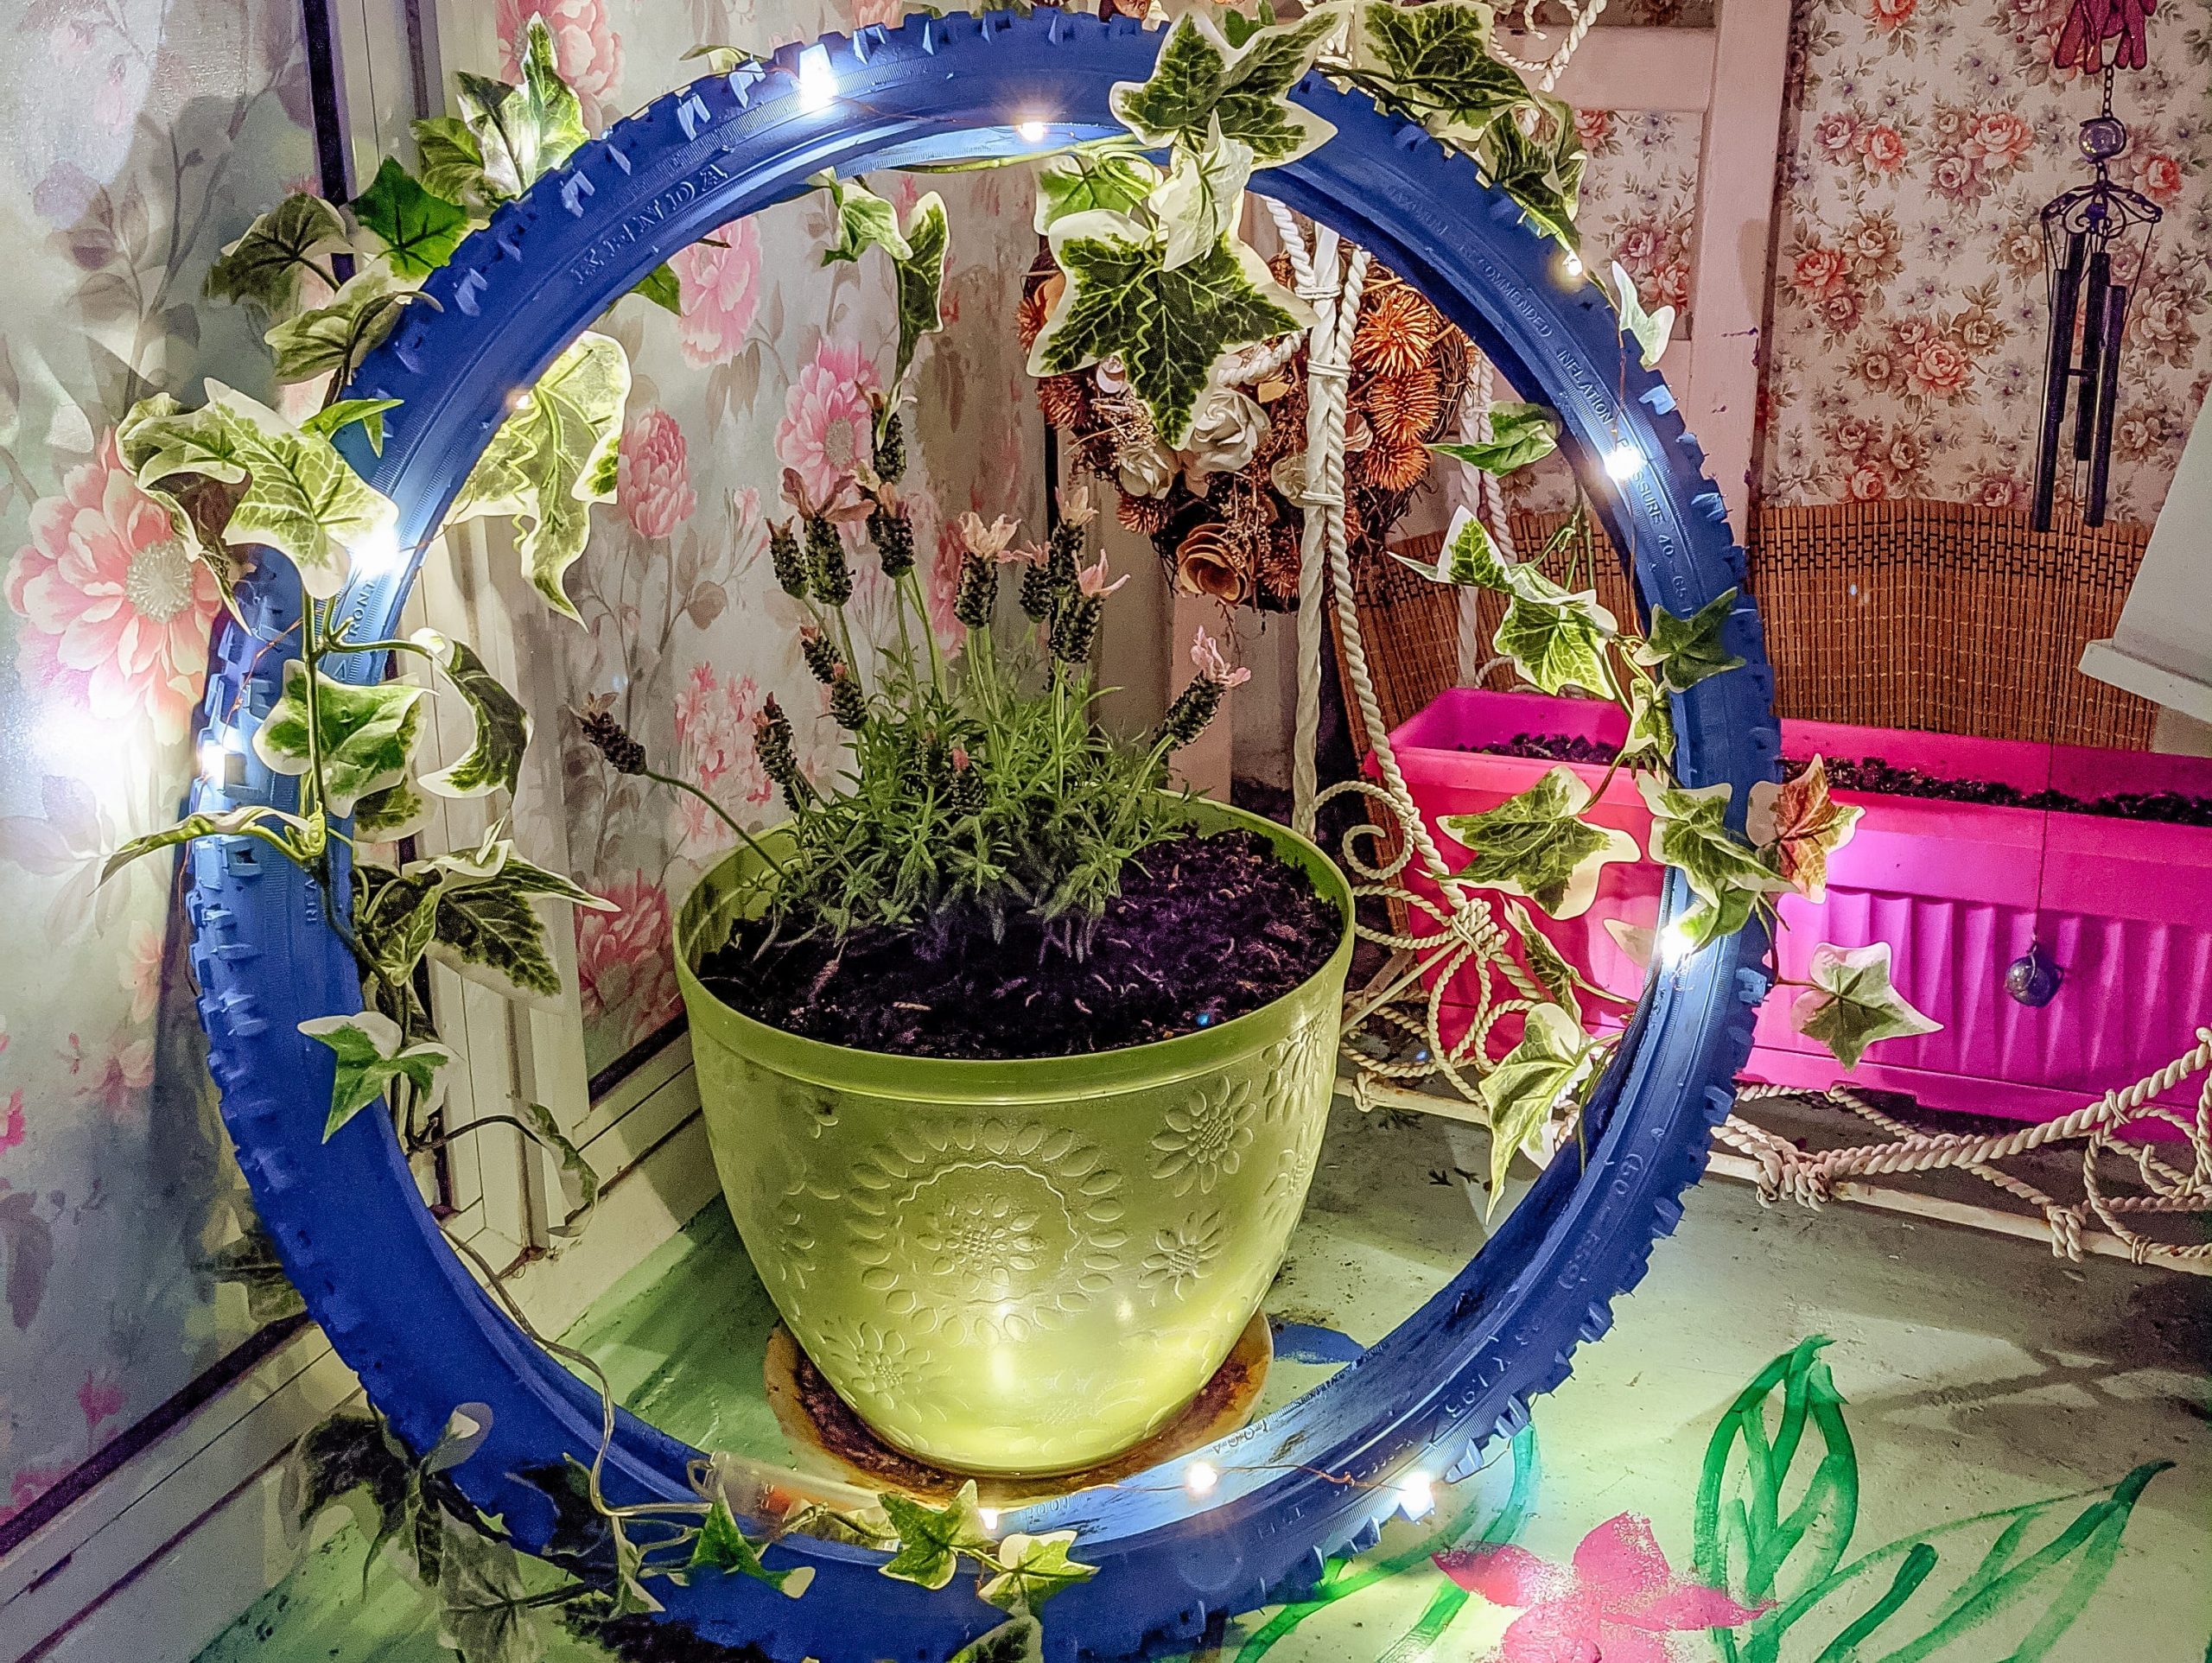 A blue tire covered in string lights and faux plants.